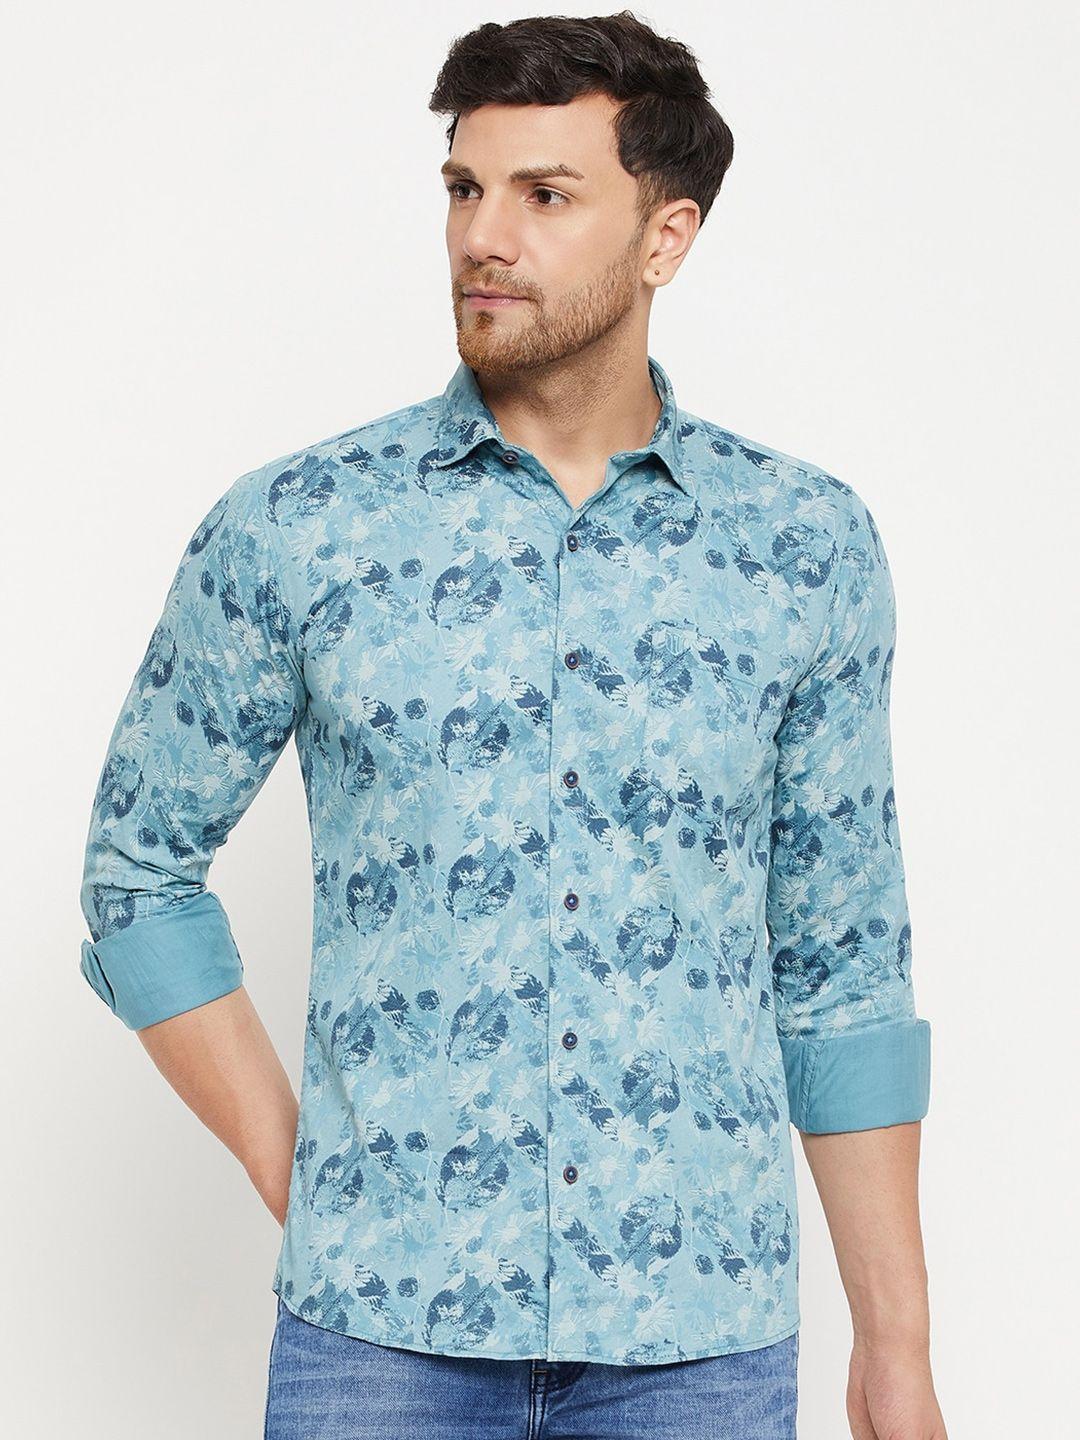 duke-slim-fit-abstract-printed-casual-pure-cotton-shirt